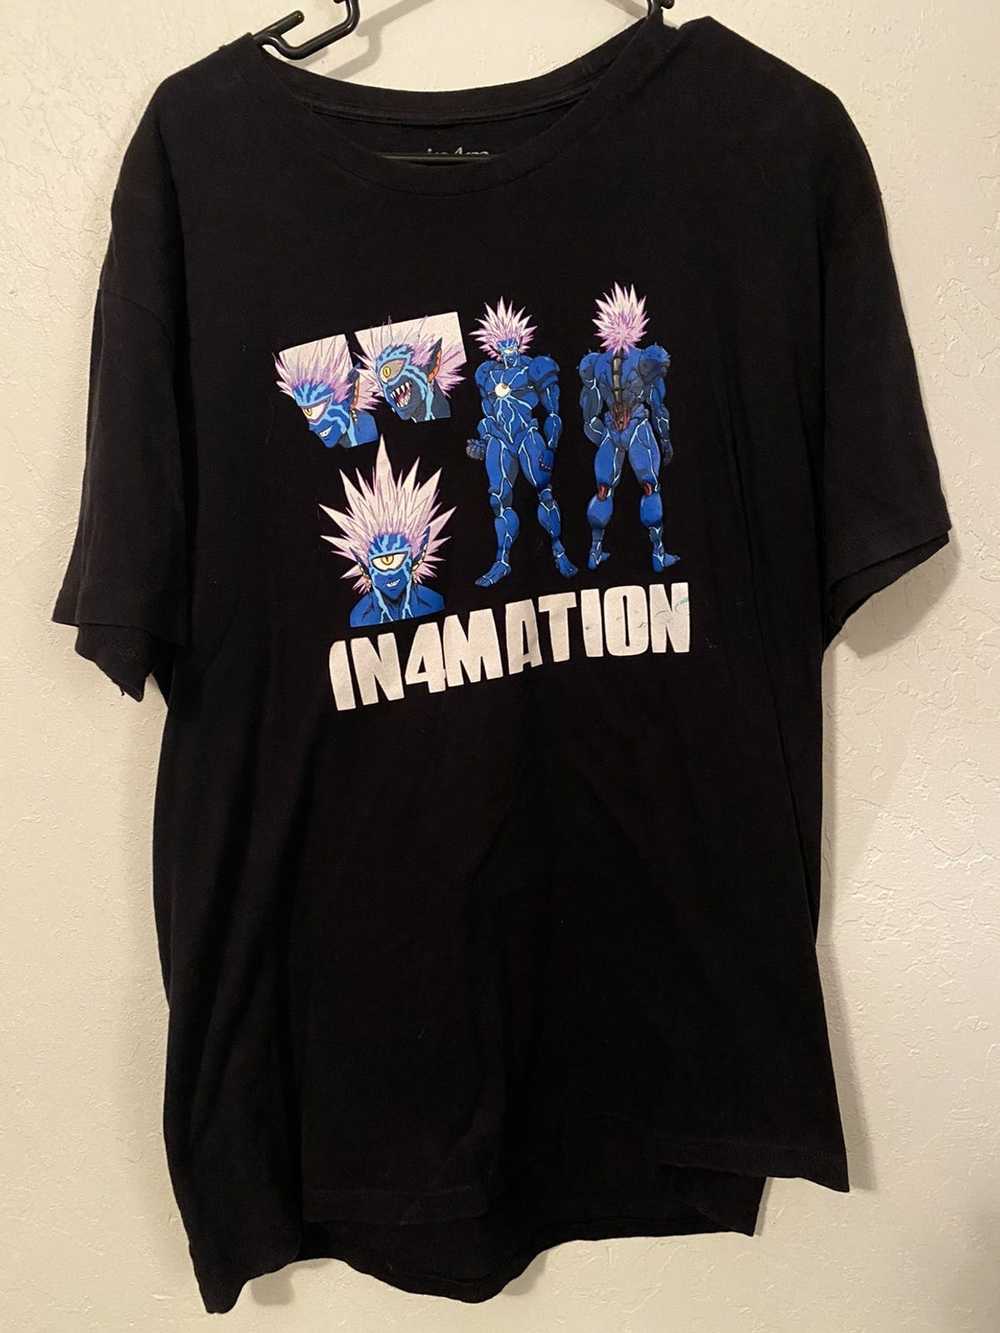 Tee Anime tee One Punch Man x In4mation - image 1